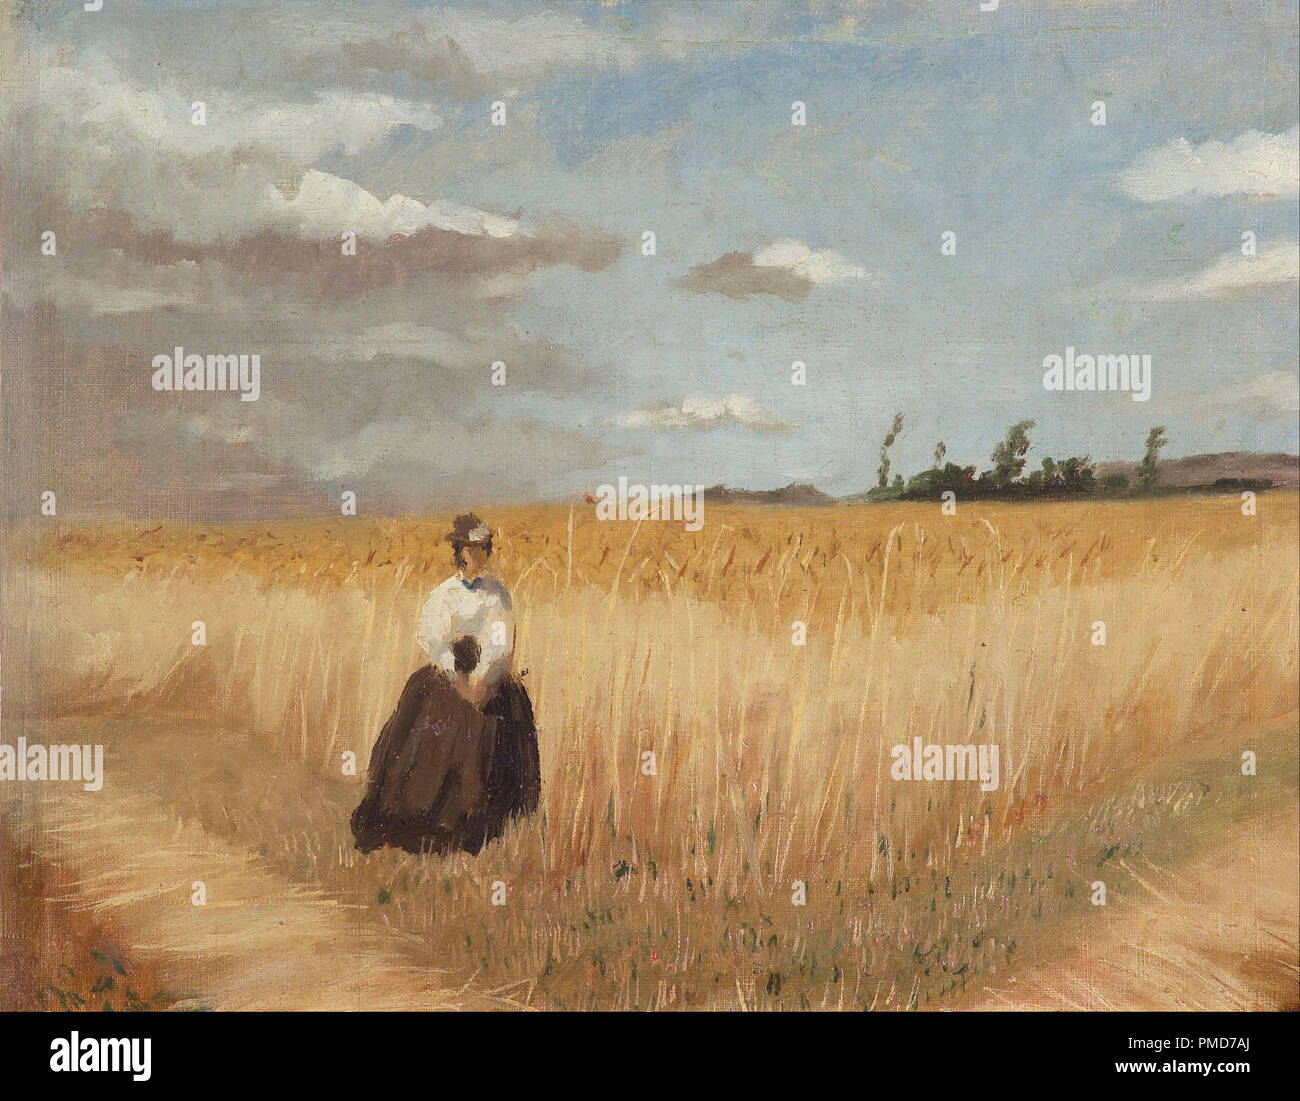 Woman in wheat field. Date/Period: Ca. 1897 - ca. 1910. Painting. Oil on canvas. Height: 300 mm (11.81 in); Width: 485 mm (19.09 in). Author: Luis Astete y Concha. Stock Photo